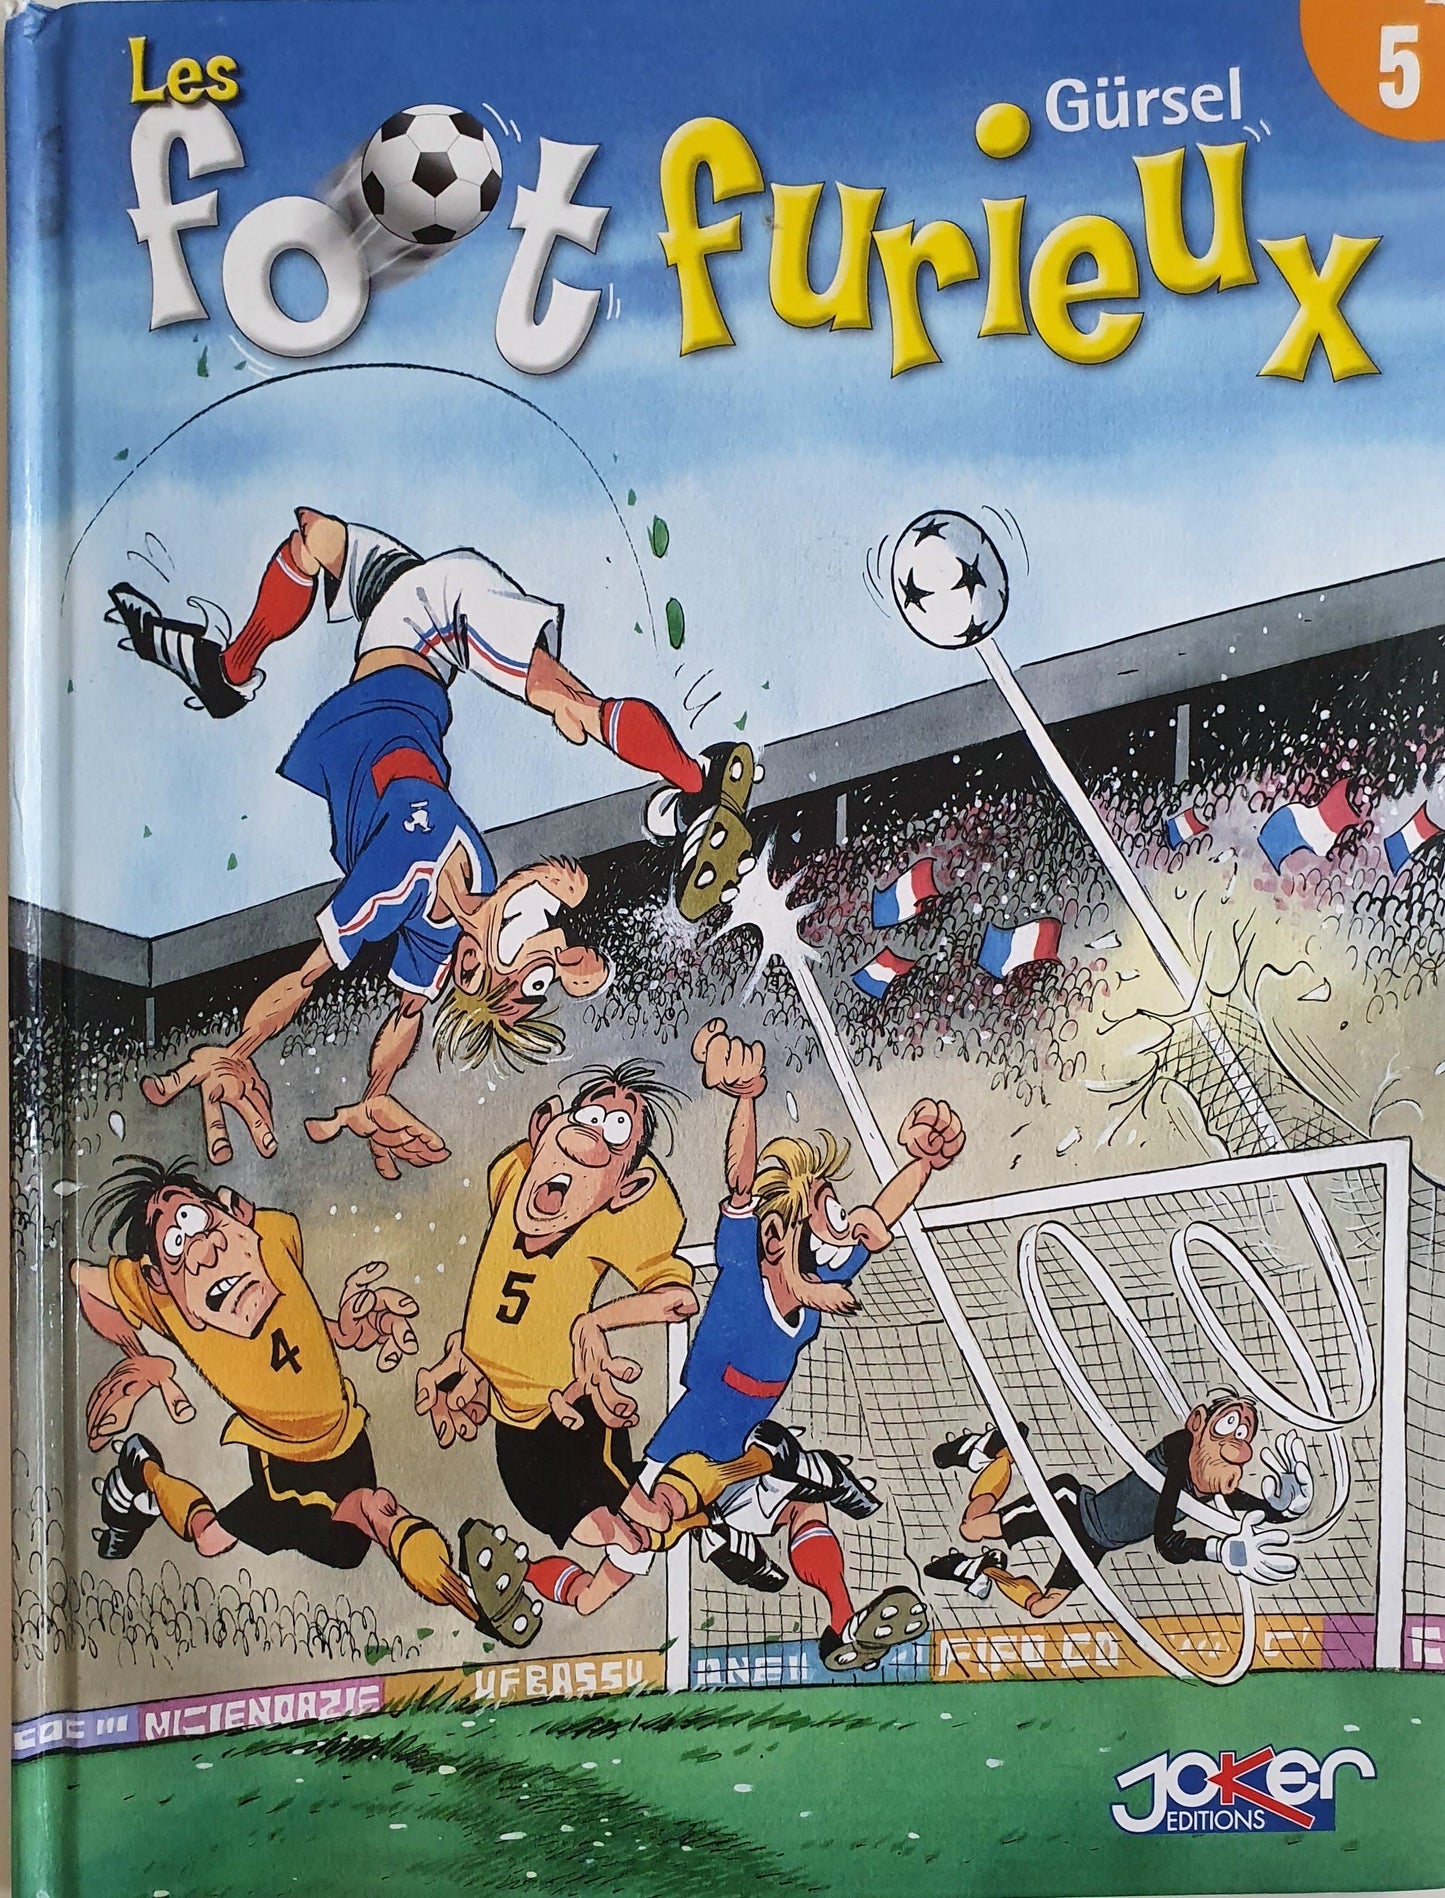 Les foot furieux Volume 5 Like New Les foot furieux  (6070066413753)